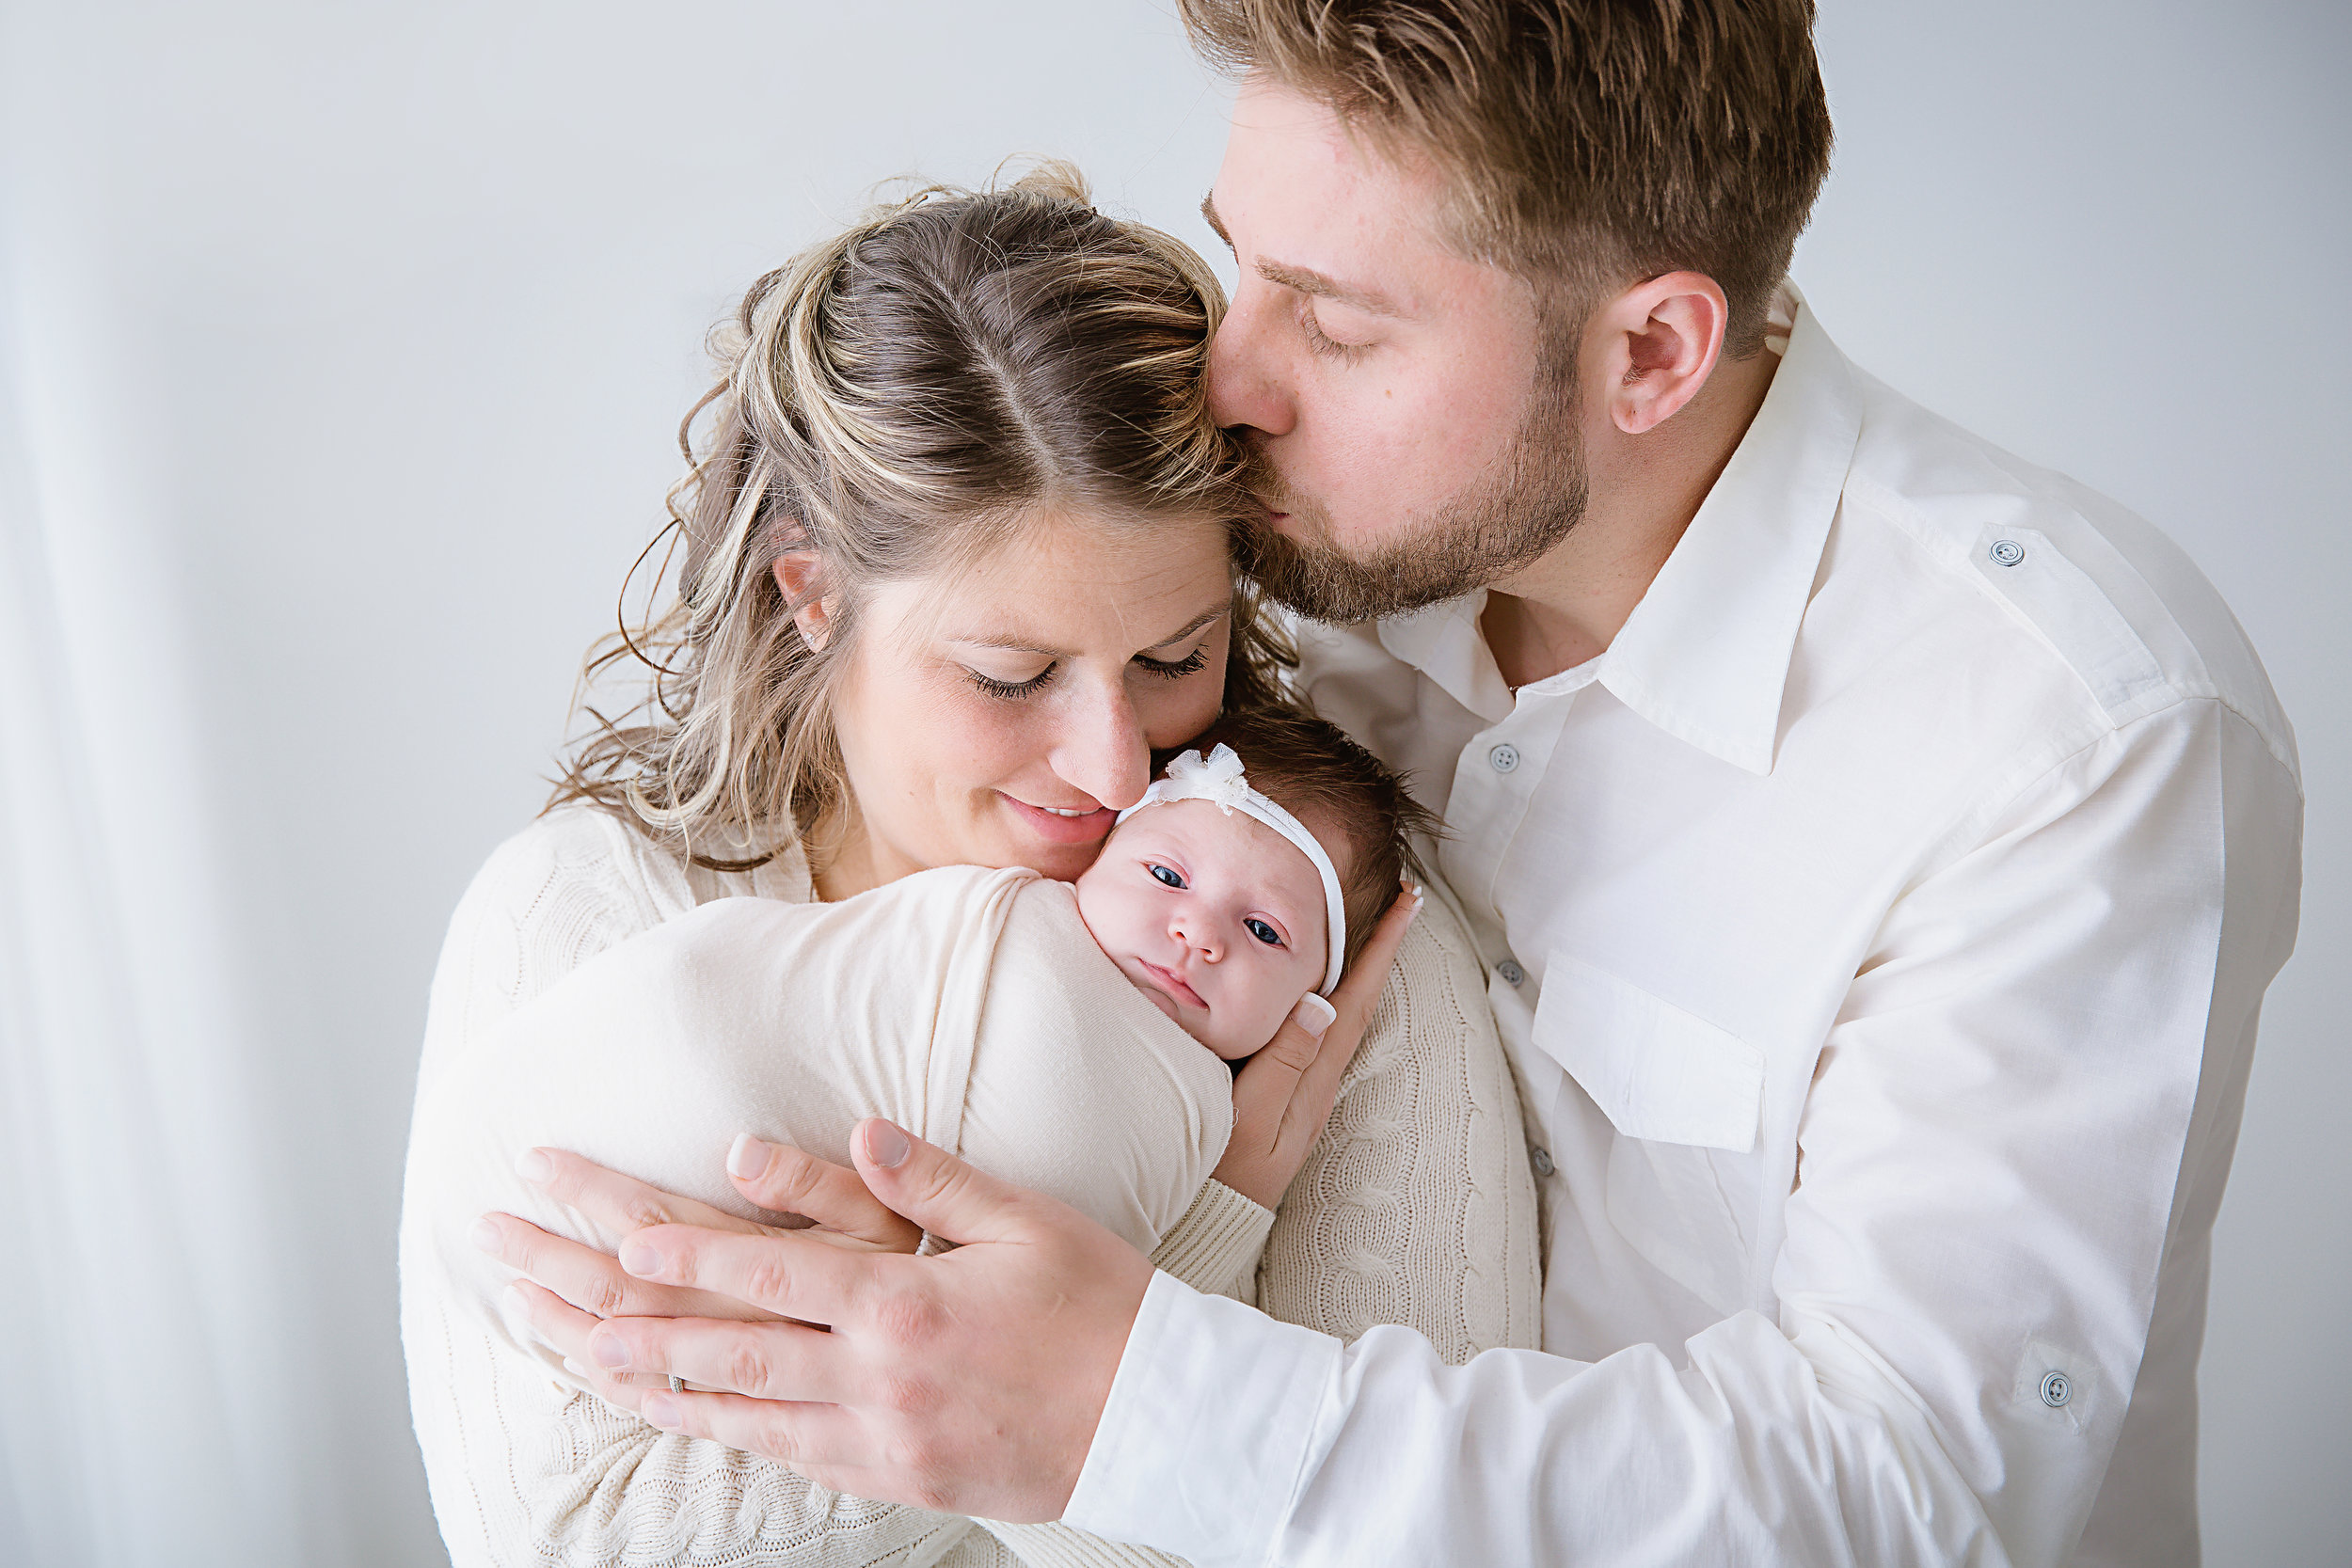 new-parents-baby-girl-daughter-newborn-father-kissing-mommy-photography-shoot-white-studio-dinosaur-headband-new-jersey